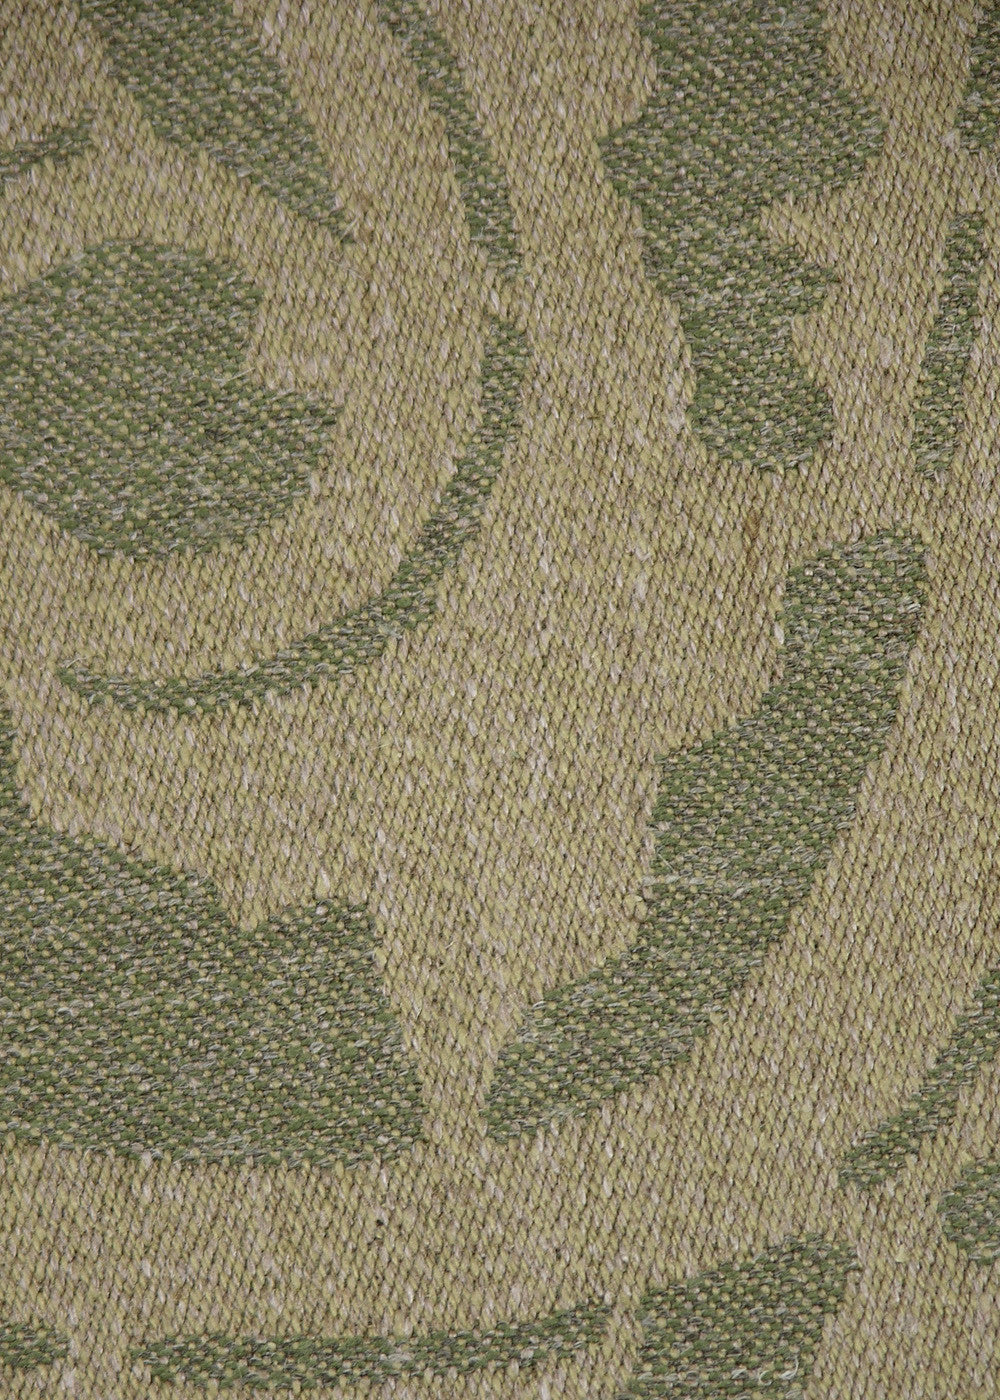 green and natural fabric with a woven large-scale damask pattern